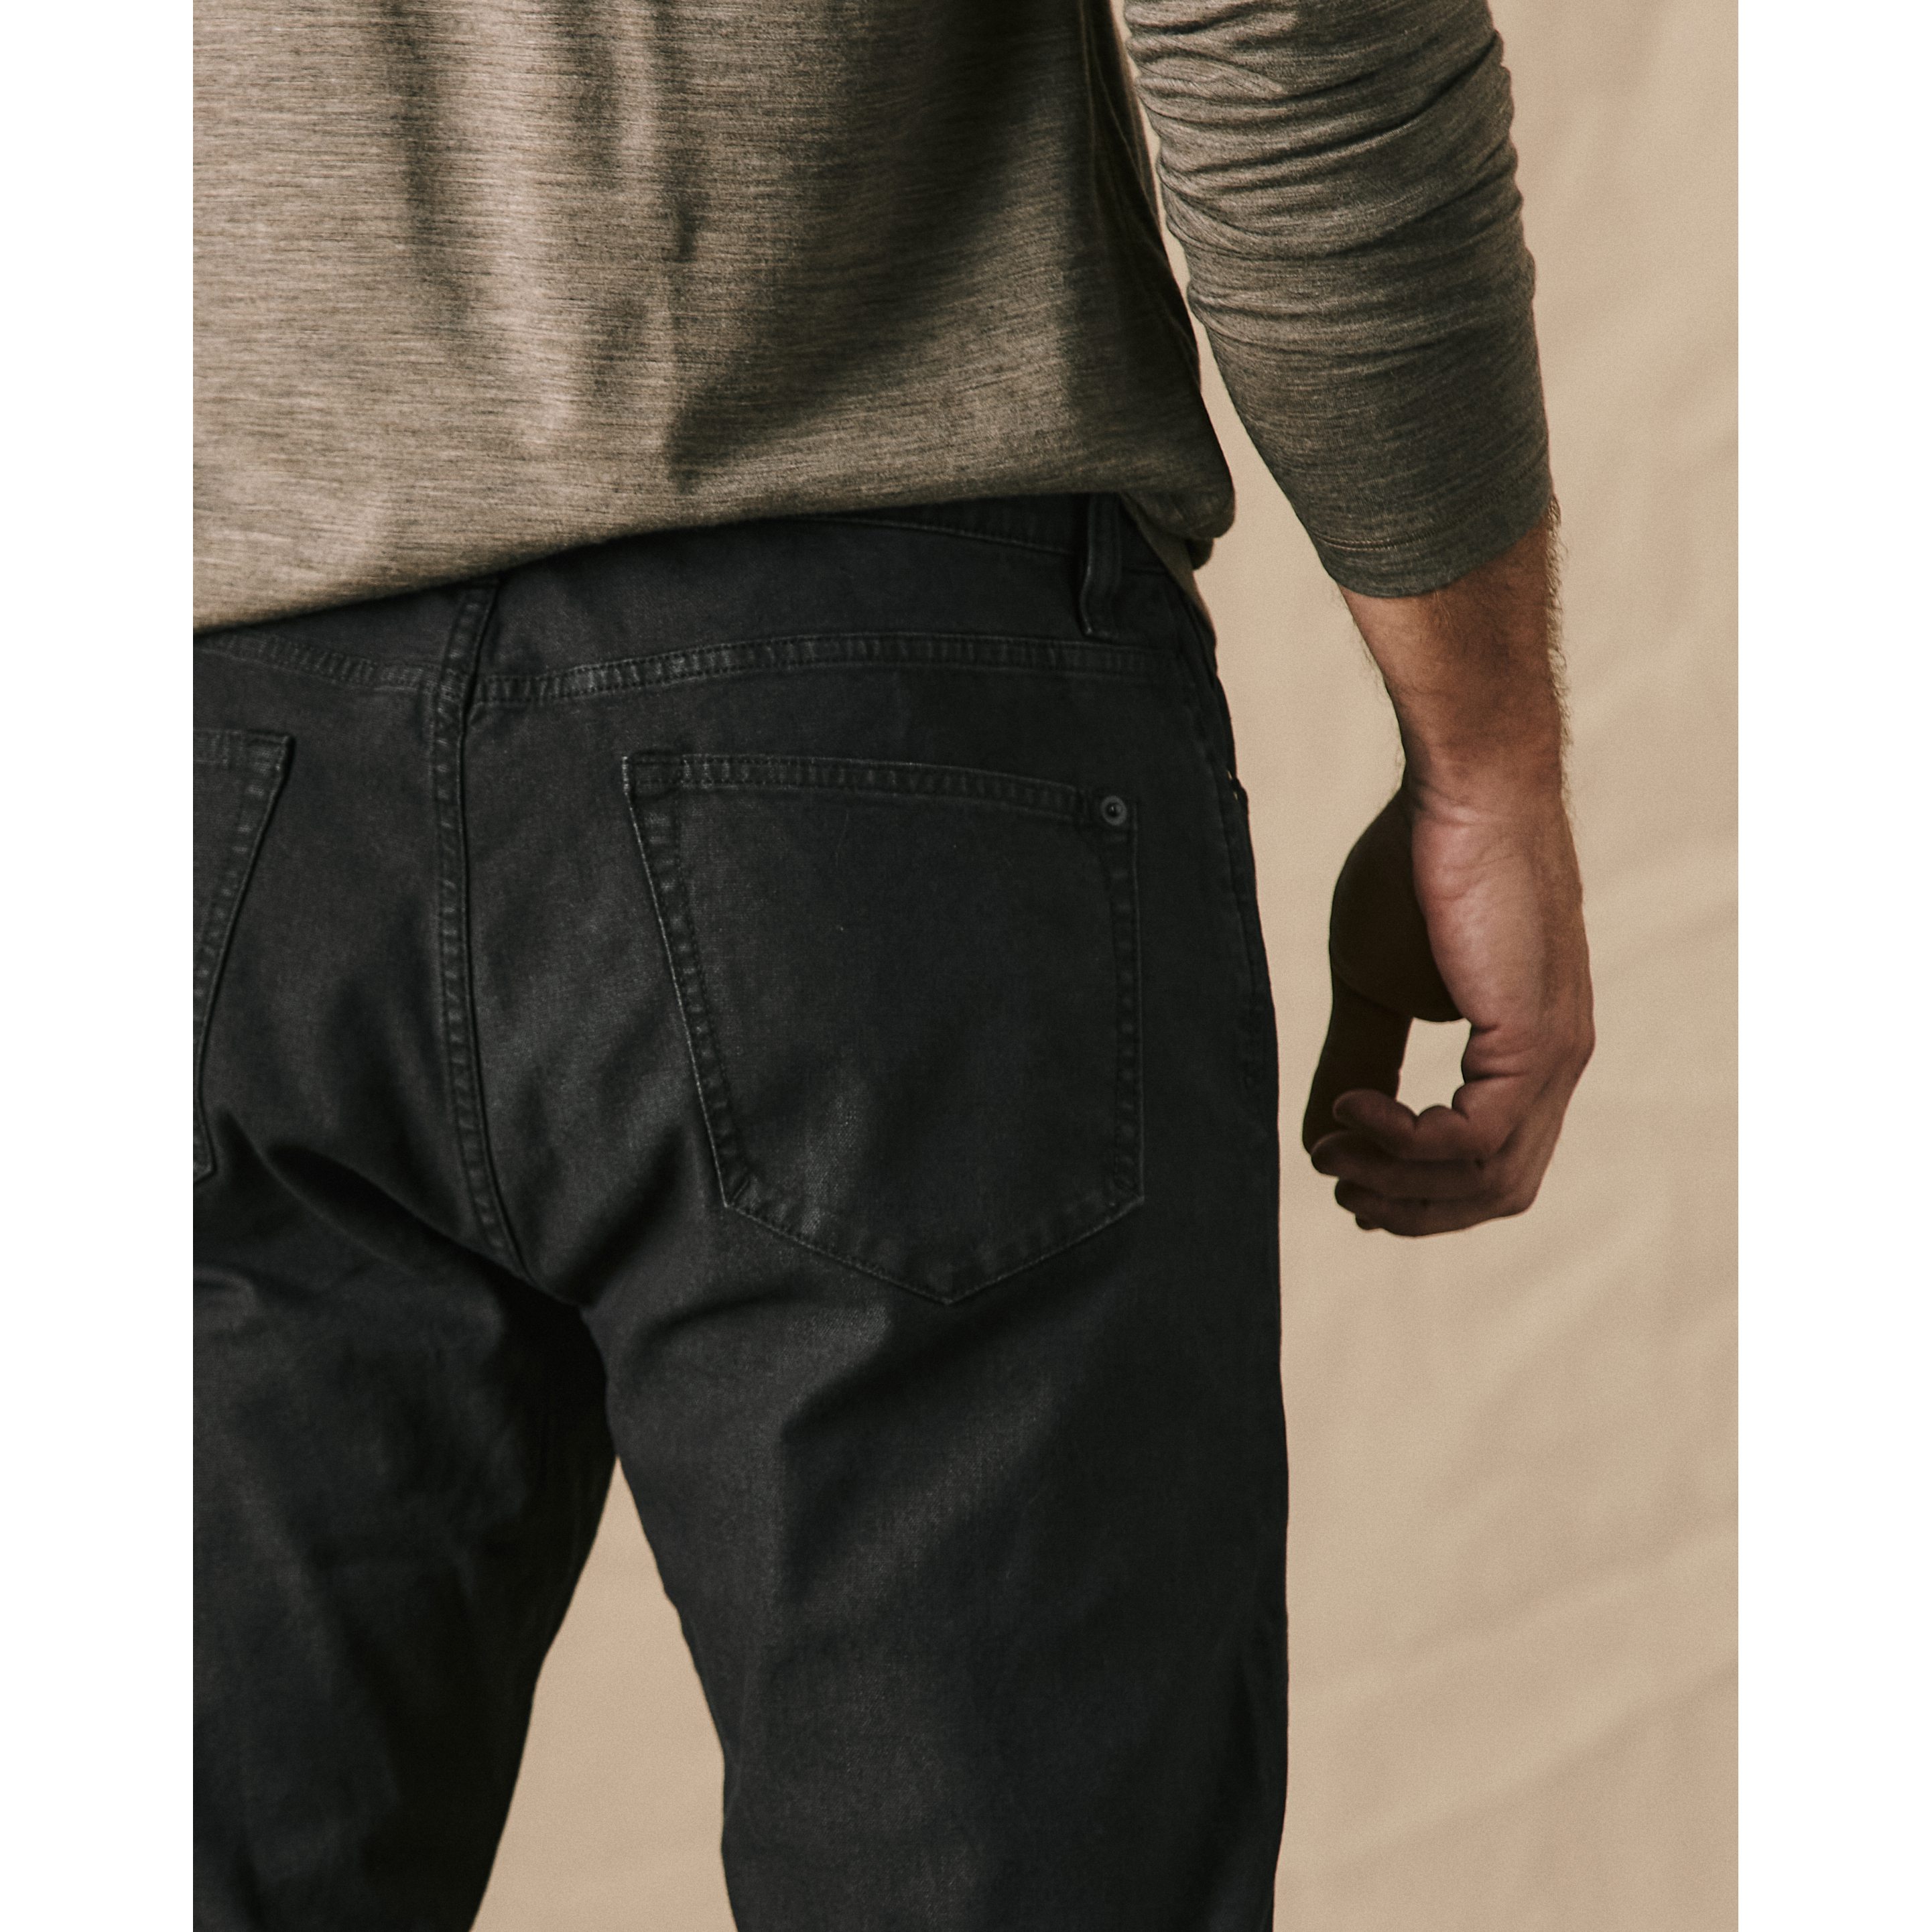 Proof Rover Pant - Slim - Anthracite | Casual Pants | Huckberry